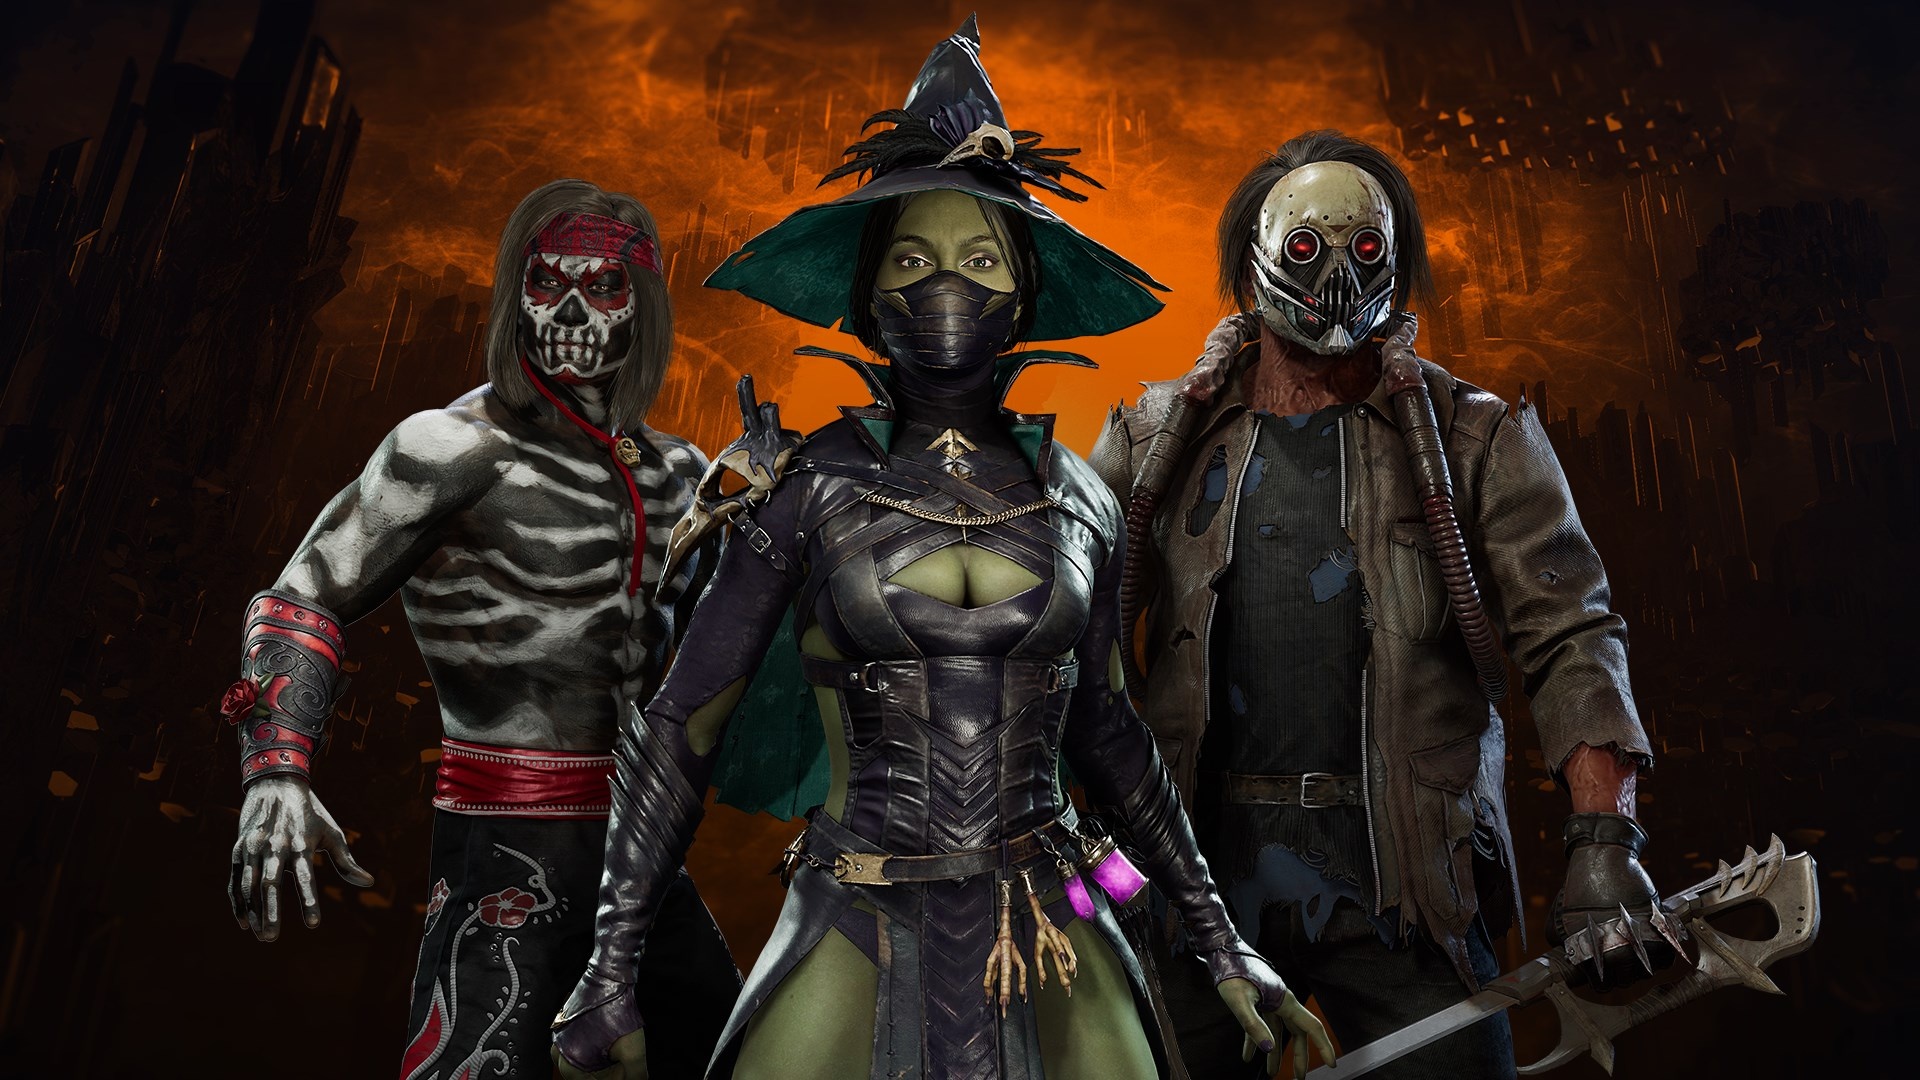 Mortal Kombat 11 Aftermath, New character skins, Halloween pack, Exciting additions, 1920x1080 Full HD Desktop